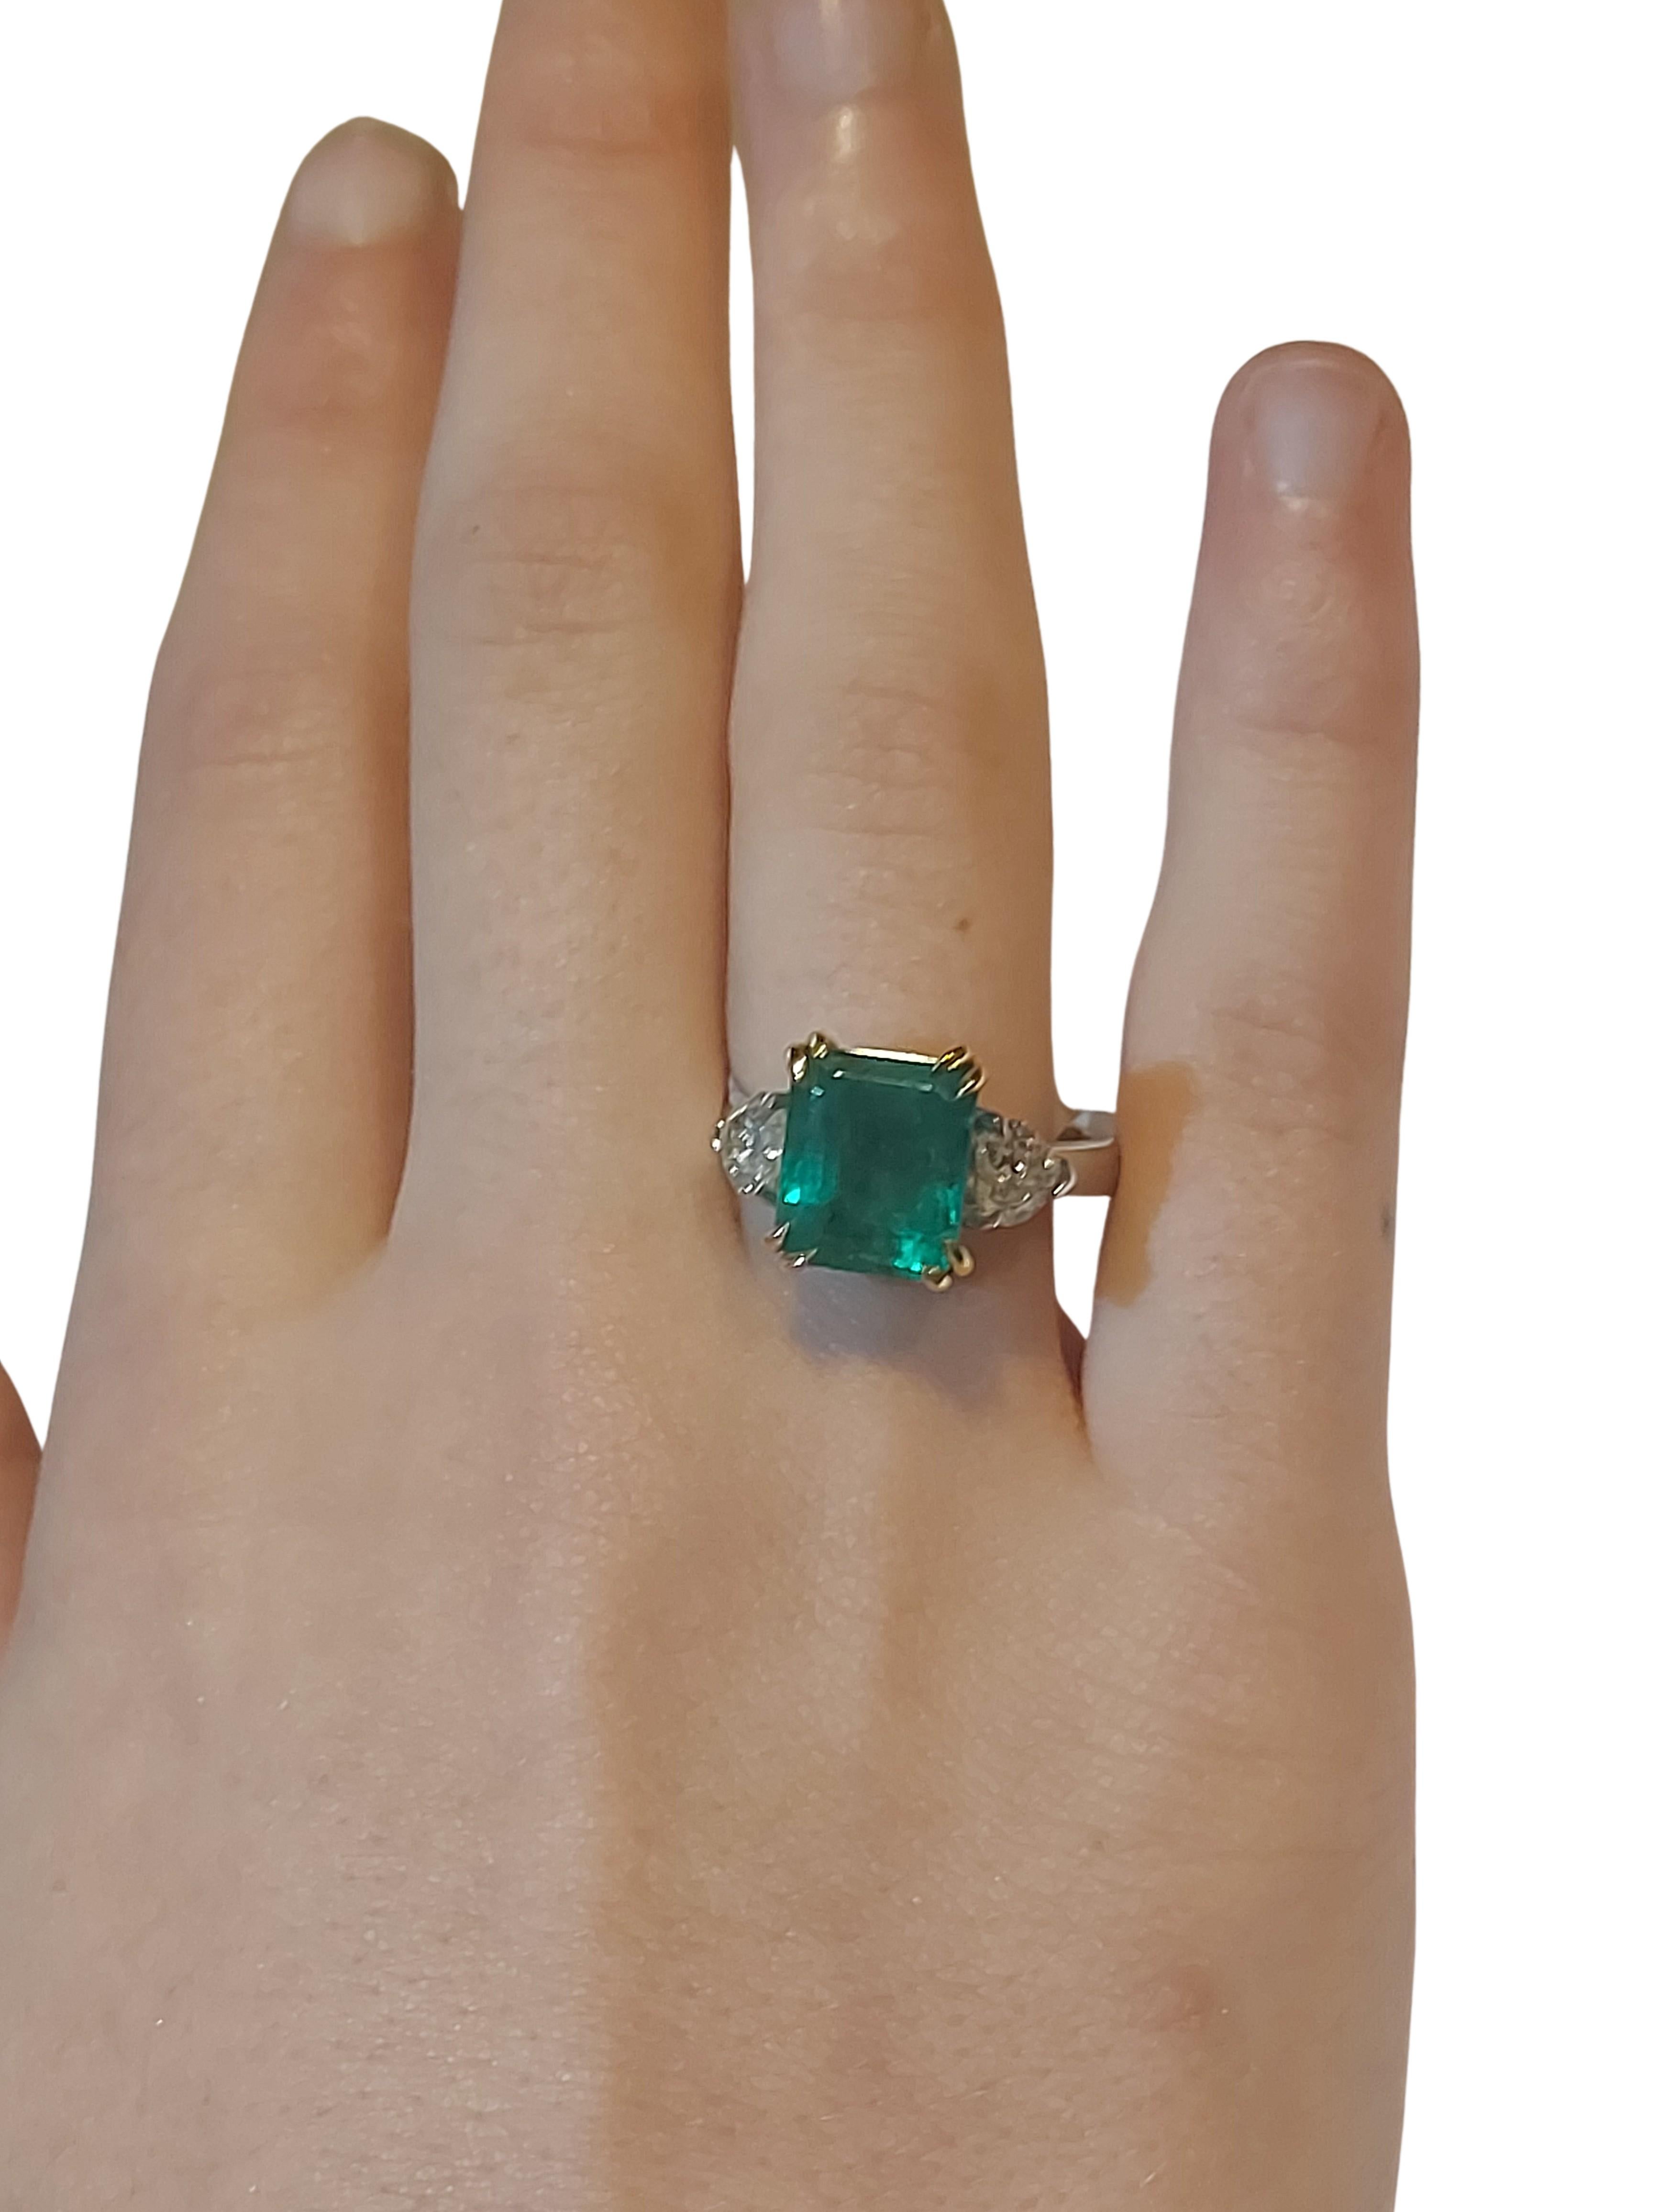 18kt White Gold Ring Wth 5.23ct Colombian Emerald & 0.93ct Heart Shaped Diamonds For Sale 4